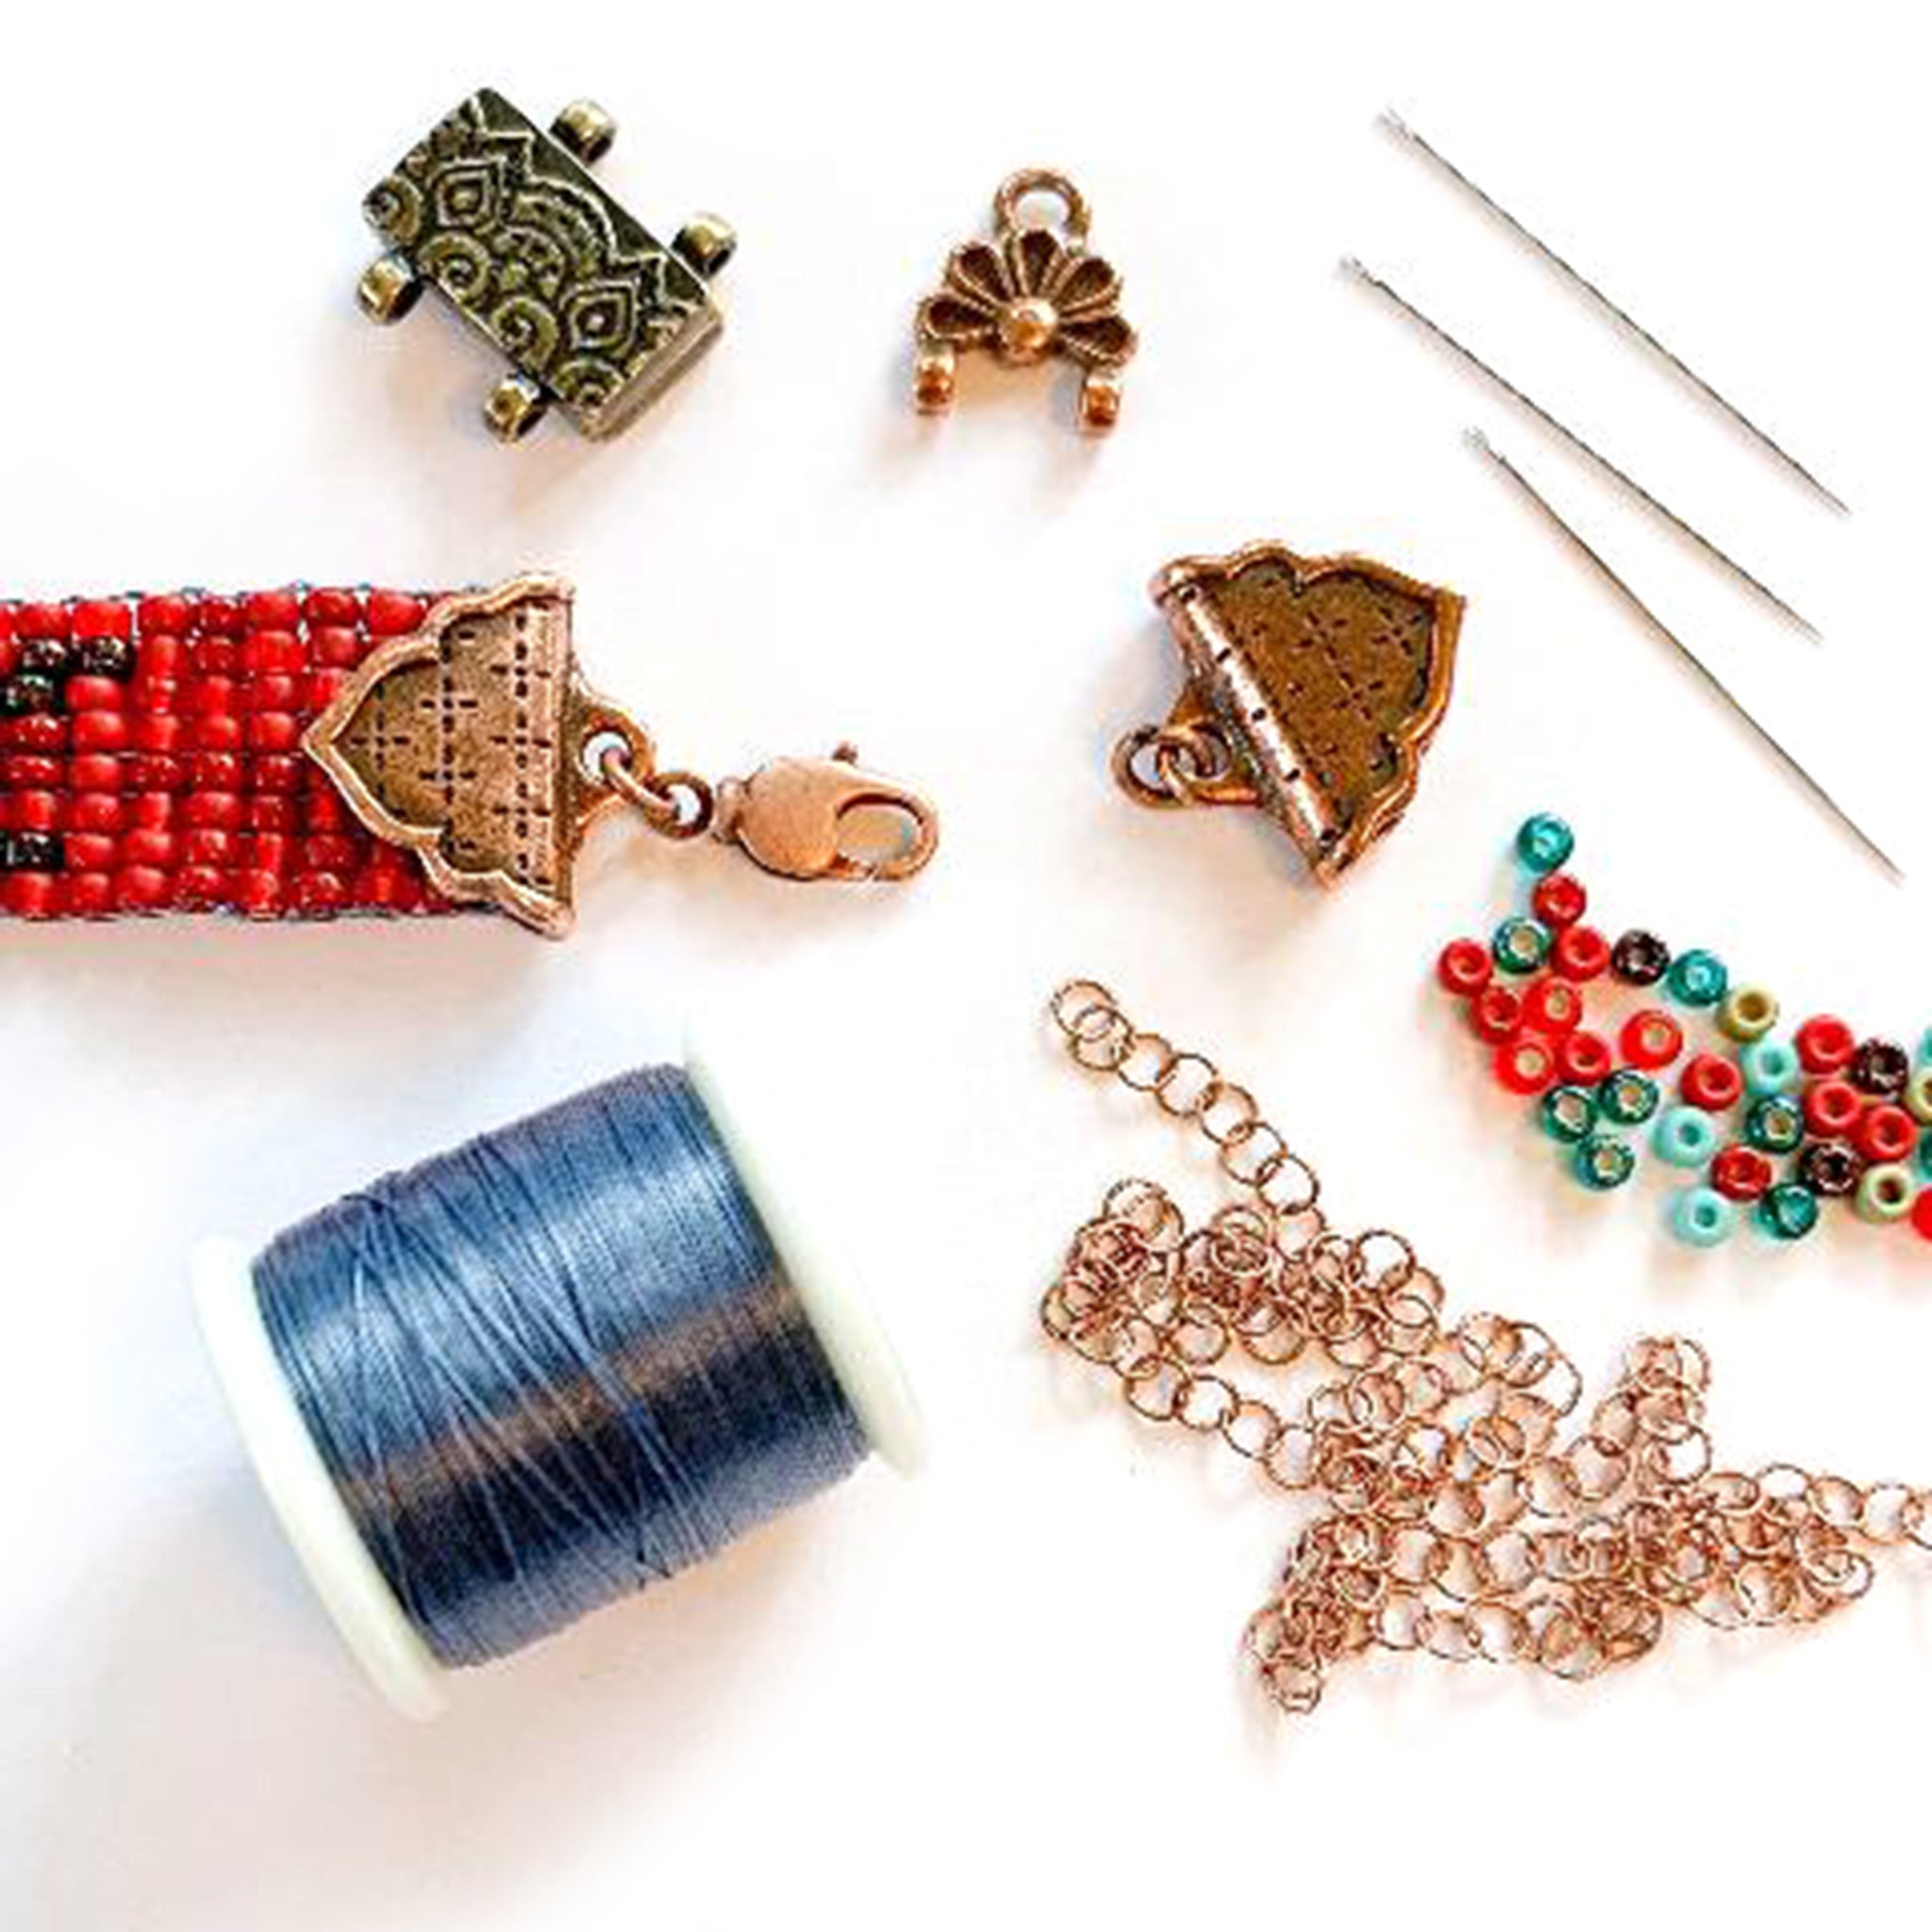 Clasps and Closures for Seed Bead Projects